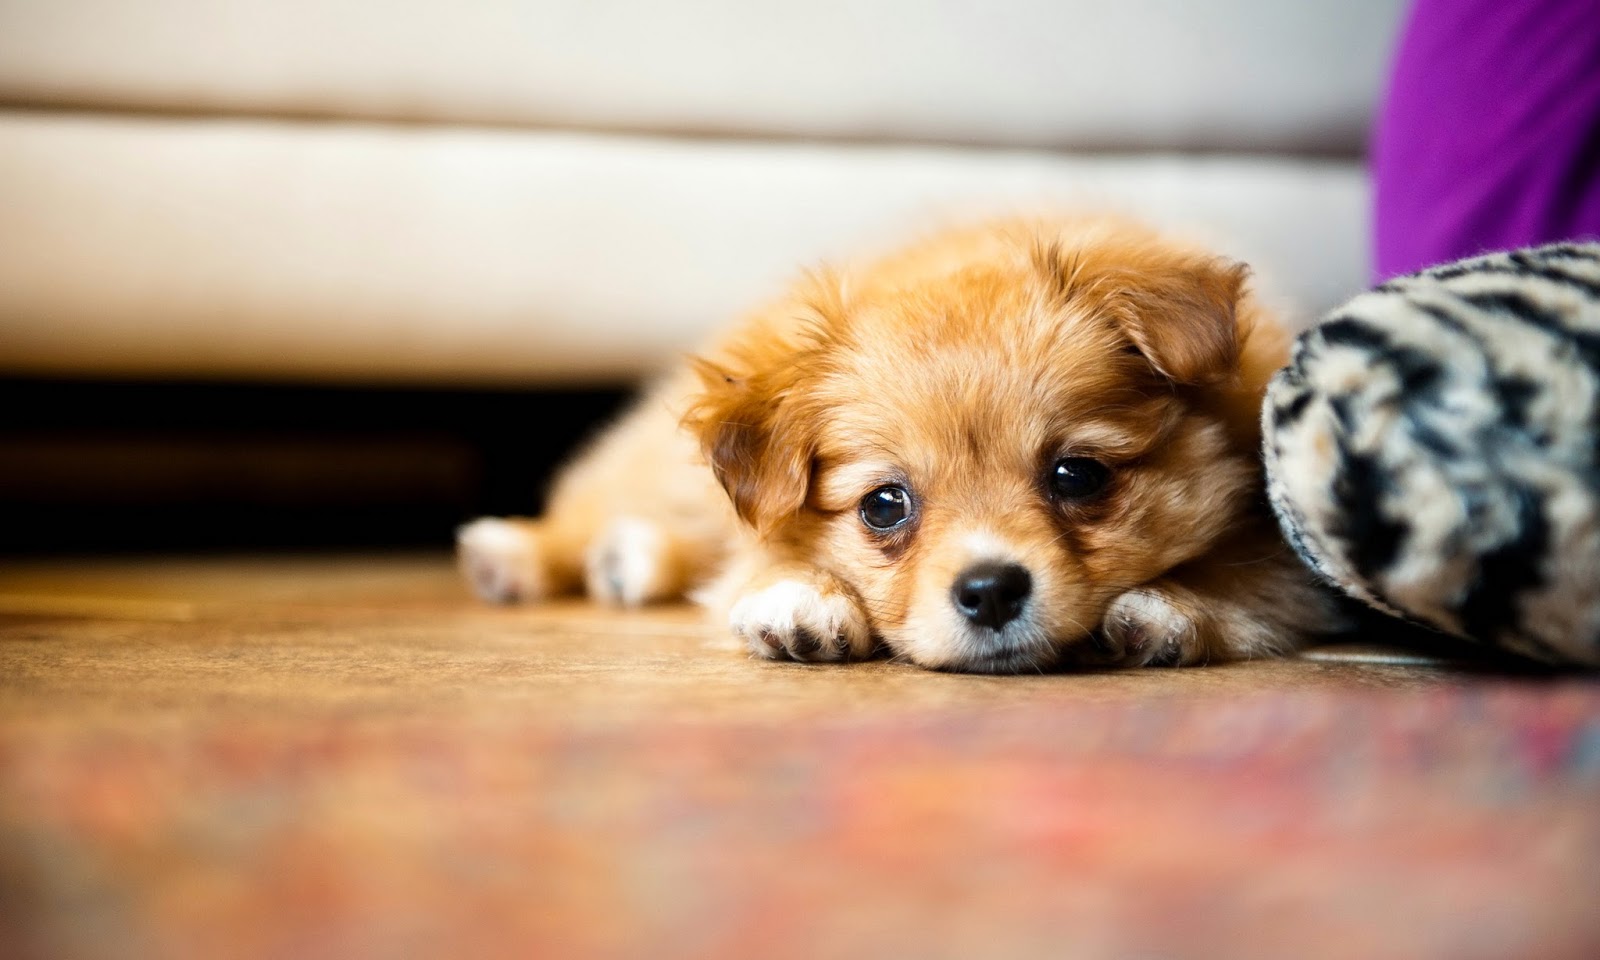 Puppy Photography 1080p Wallpapers Hd Wallpapers High - Puppies Hd Wallpapers 1080p , HD Wallpaper & Backgrounds